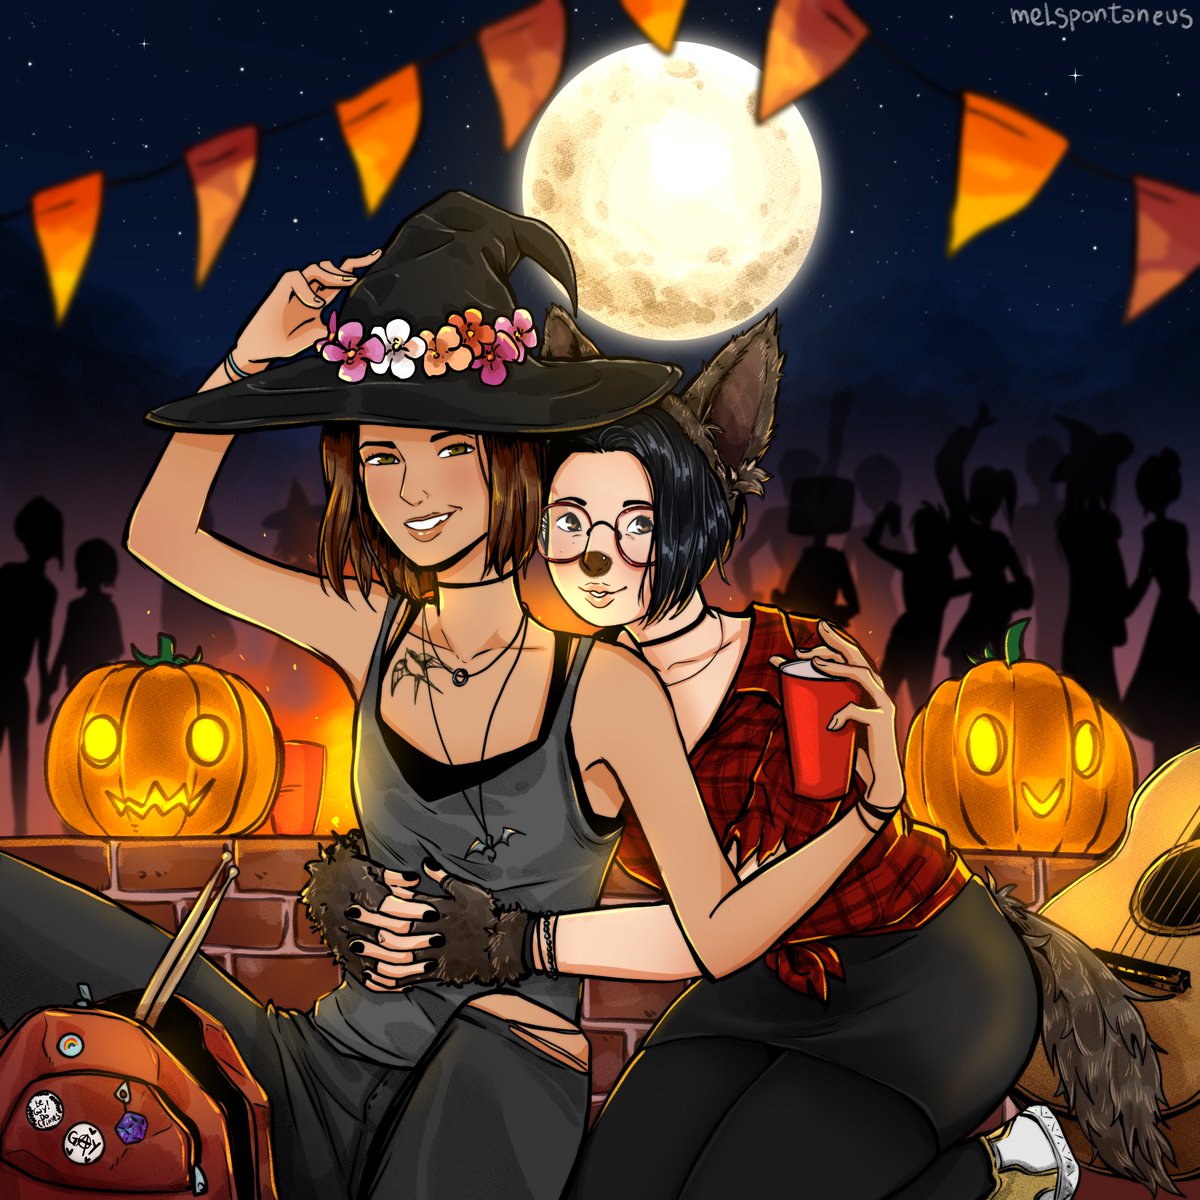 Halloween is in 10 days! To get in the spirit, we'll be showcasing some excellent #LifeIsStrange fan art and cosplay in the run up! First up is this gorgeous image of Steph and Alex by @melspontaneus! Have some fan art or cosplay you've been working on? We'd love to see it!